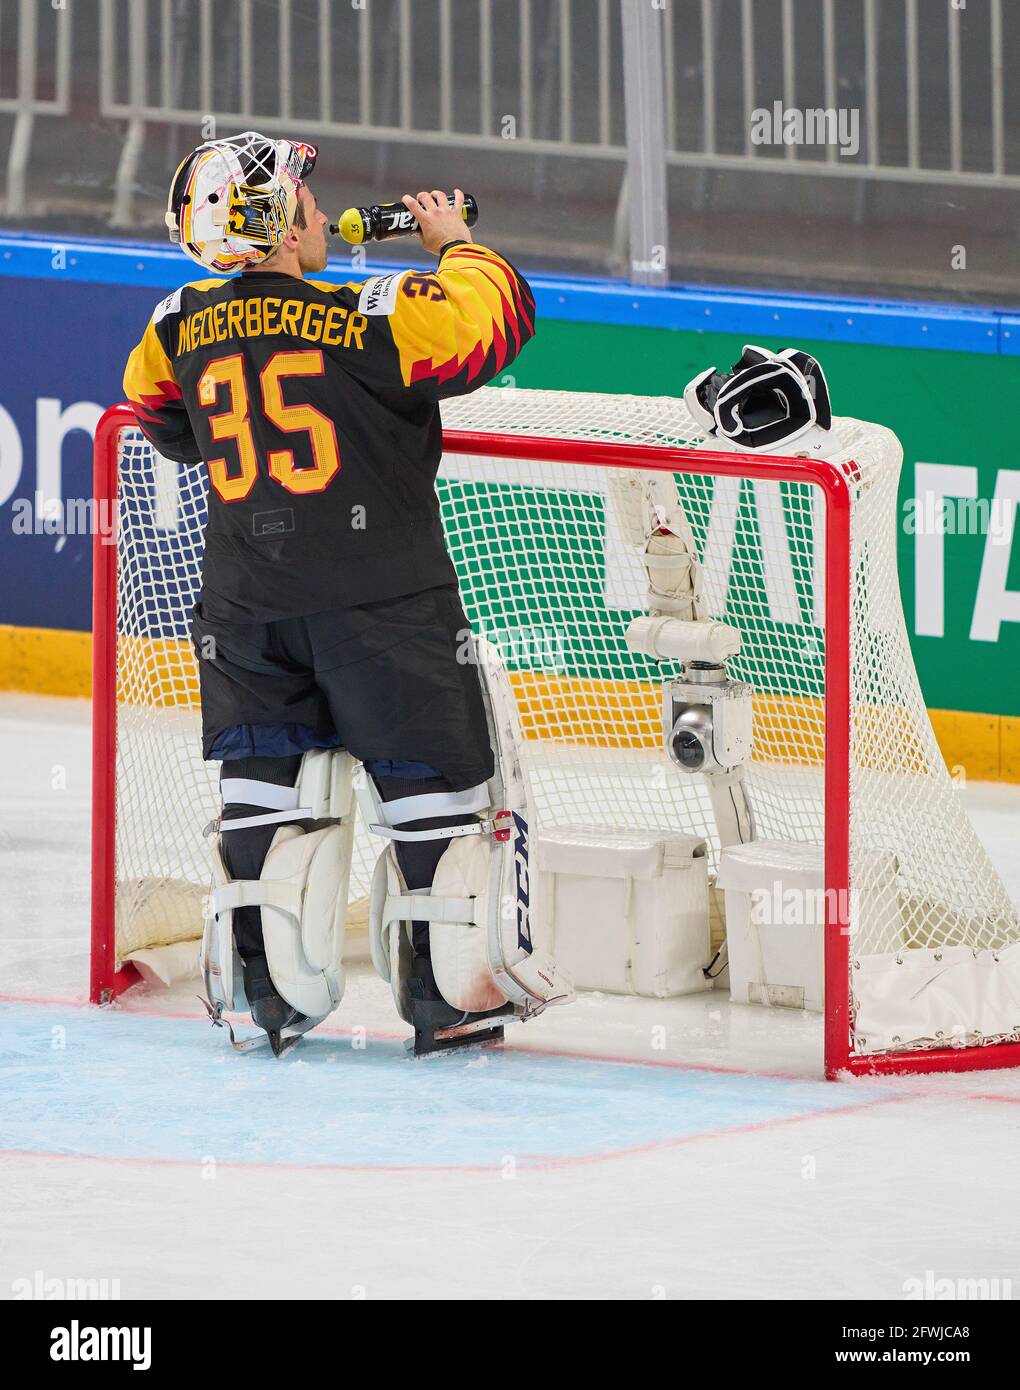 Riga, Latvia. 22nd May, 2021. Mathias NIEDERBERGER, goalkeeper DEB 35 drinks from water bottle, thirst, thirsty, liquid, thirst quencher, isotonic, nutrition, sports nutrition, electrolyte balance, wasser, trinken, getränk,  NORWAY - GERMANY 1-5 IIHF ICE HOCKEY WORLD CHAMPIONSHIPS Group B  in Riga, Latvia, Lettland, May 22, 2021,  Season 2020/2021 © Peter Schatz / Alamy Live News Credit: Peter Schatz/Alamy Live News Stock Photo